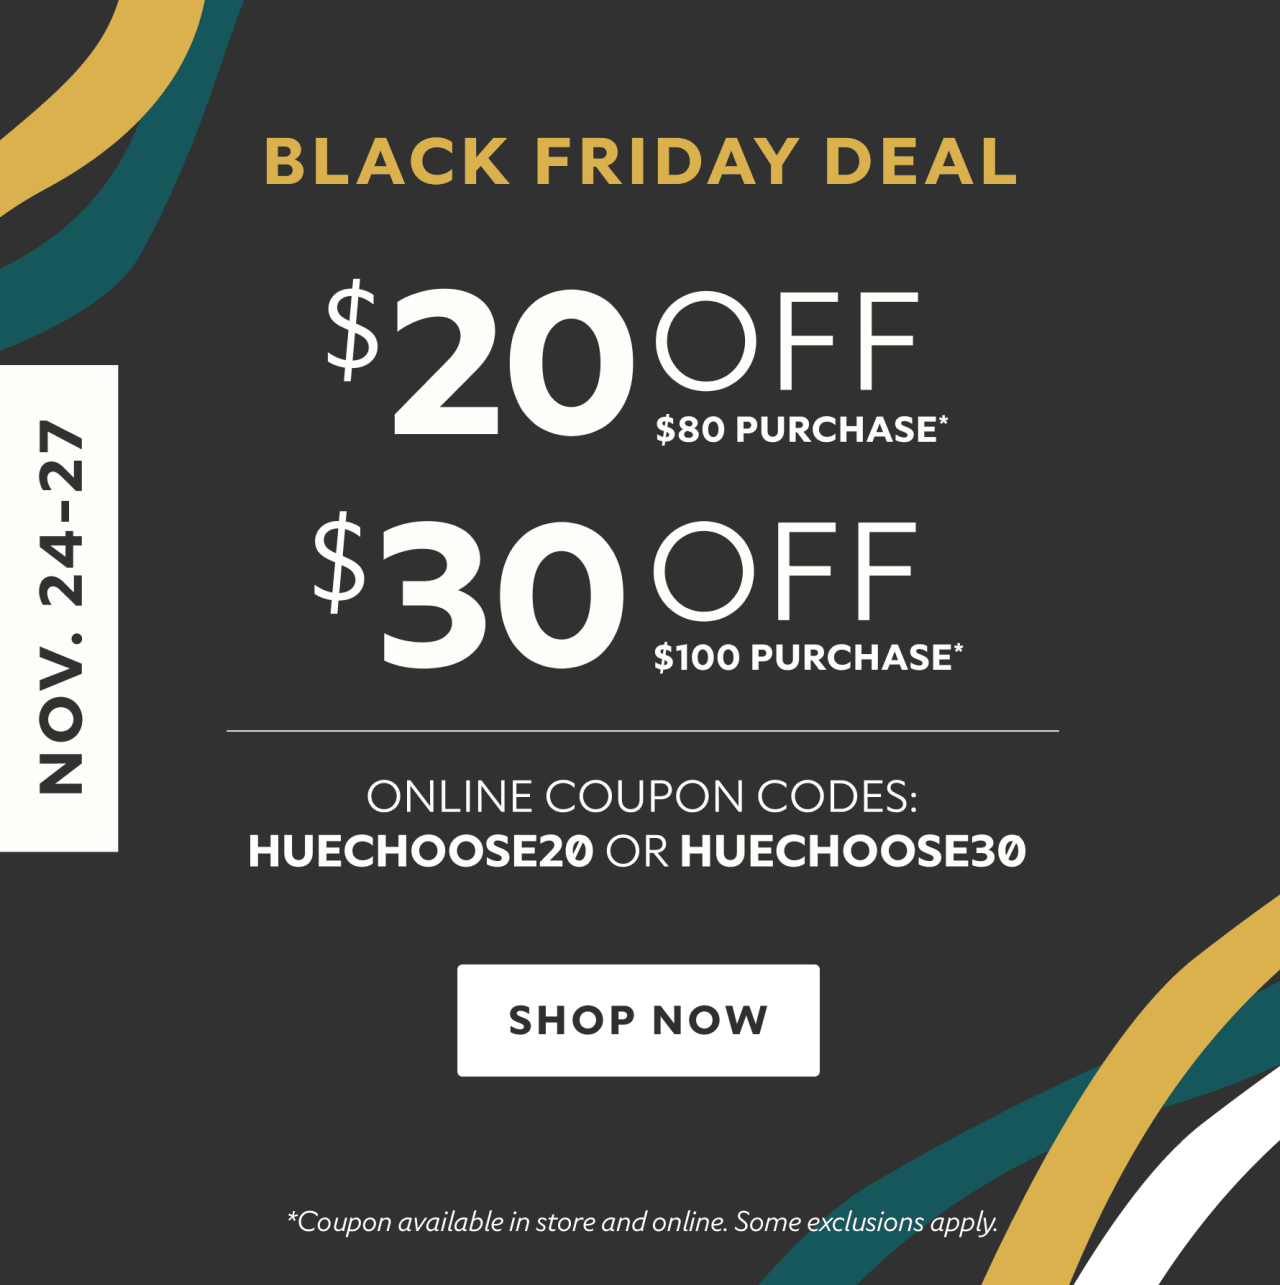 Nov. 24-27. Black Friday deal. $20 off $80 purchase* $30 off $100 purchase* Online coupon codes: HUECHOOSE20 or HUECHOOSE30 Shop now. *Coupon available in store and online. Some exclusions apply.